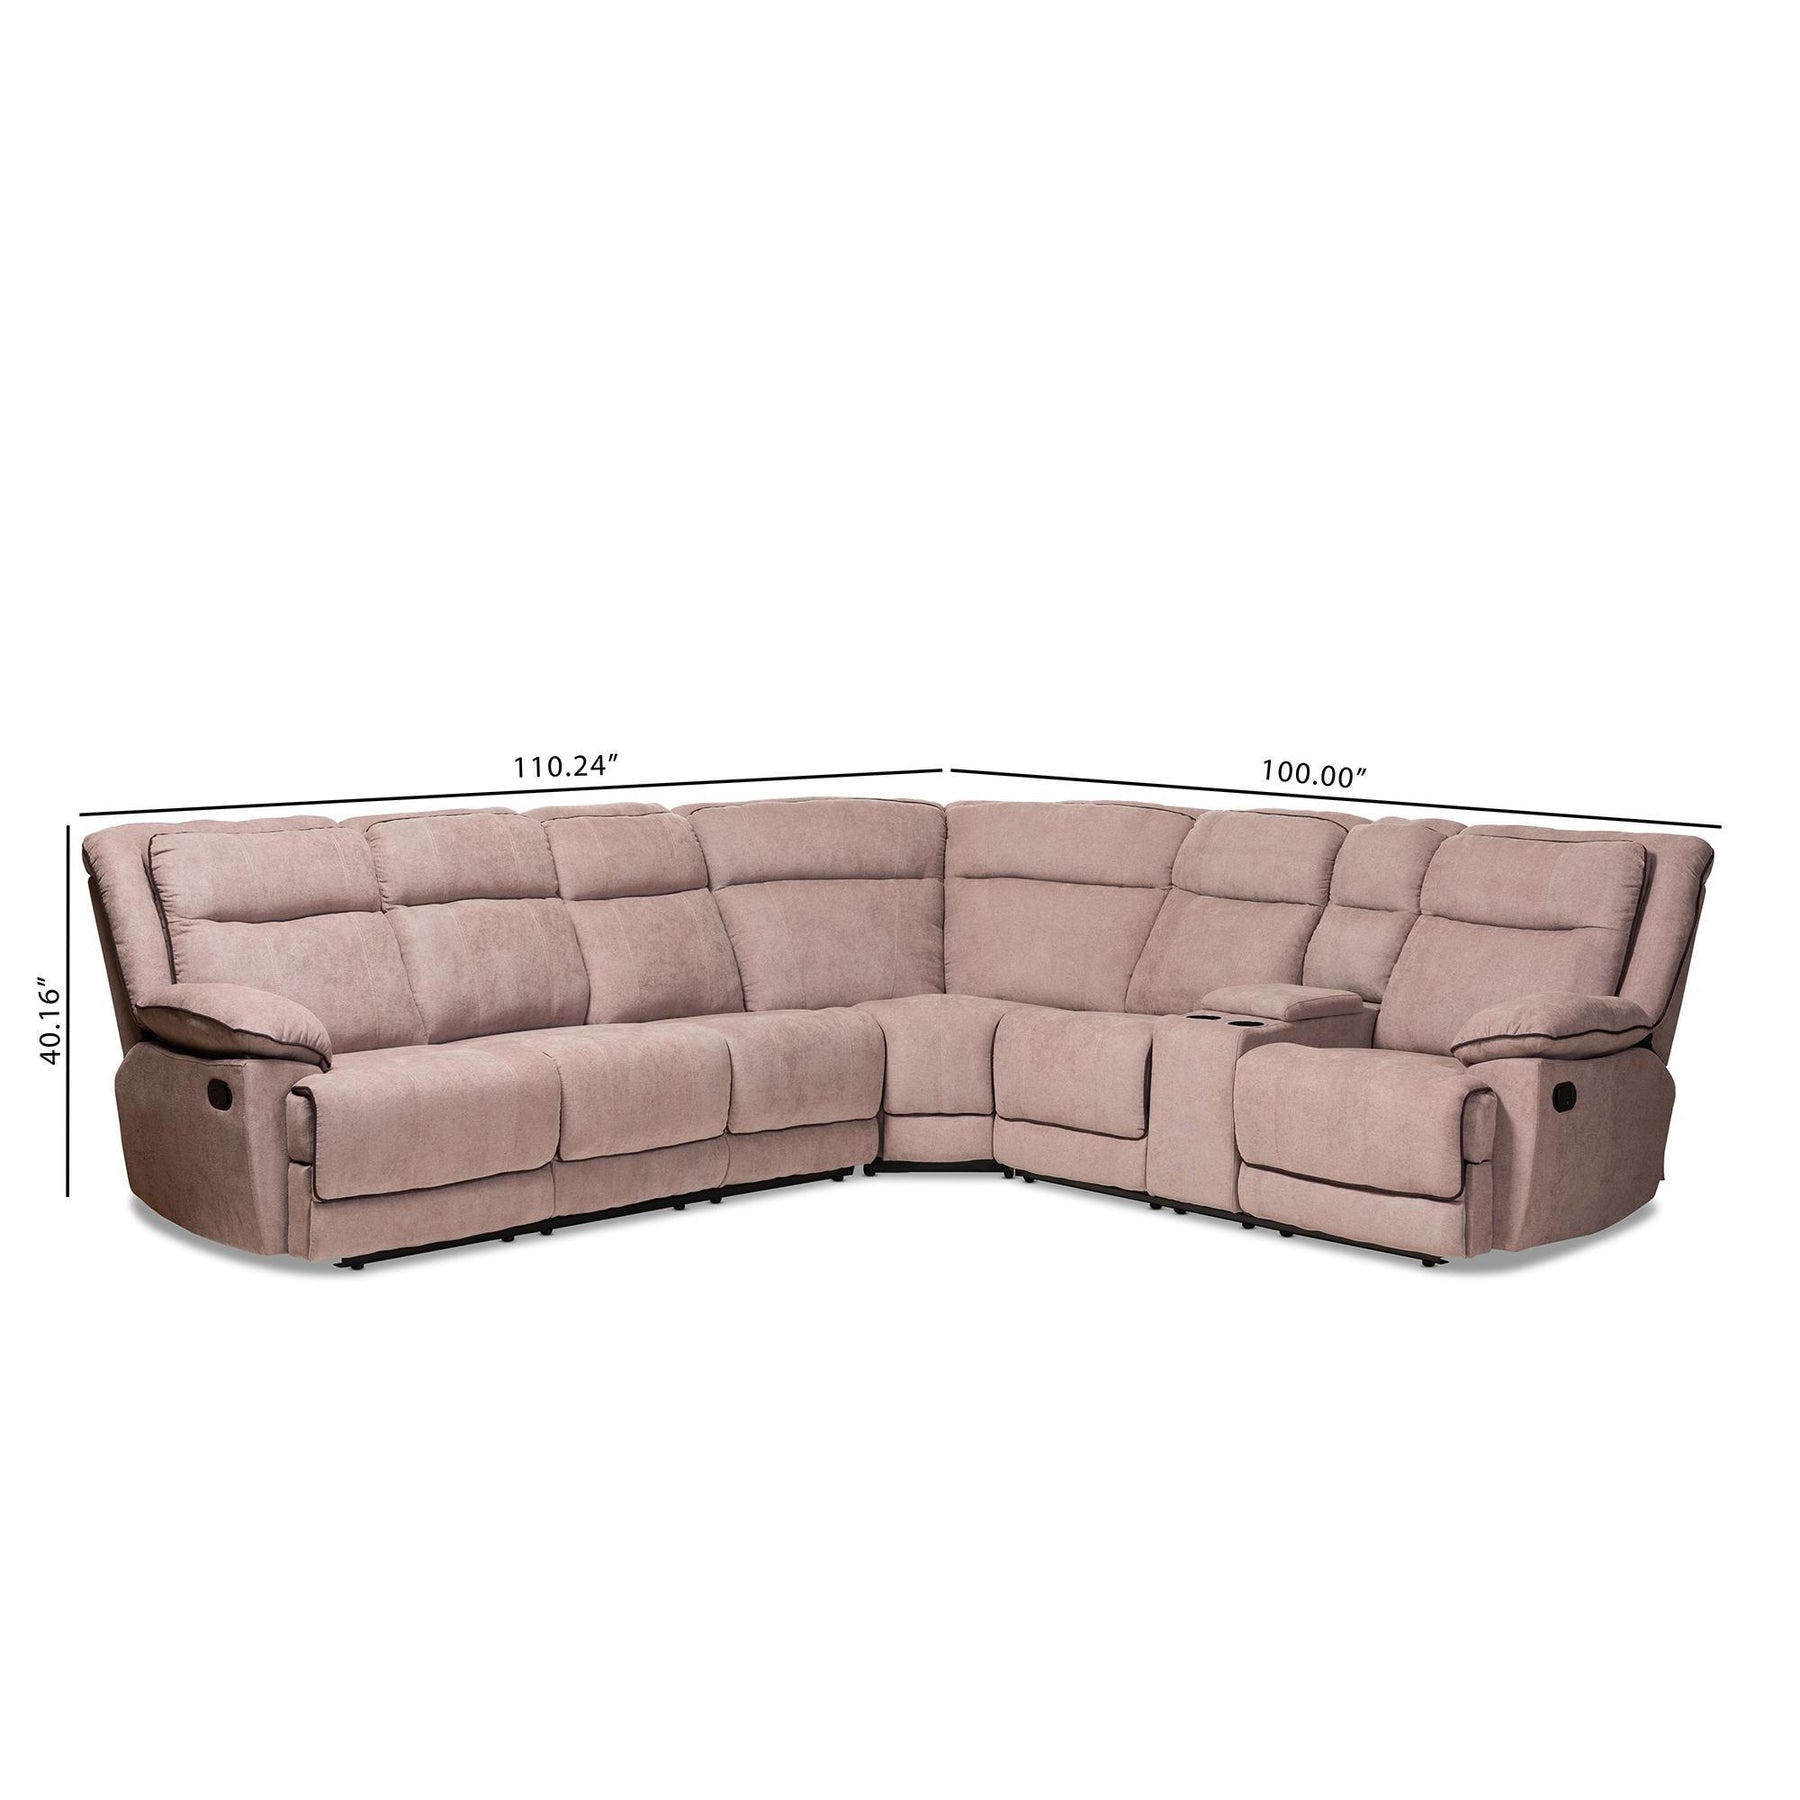 Baxton Studio Sabella Modern And Contemporary Taupe Fabric Upholstered 7-Piece Reclining Sectional - RX038A-Taupe-SF